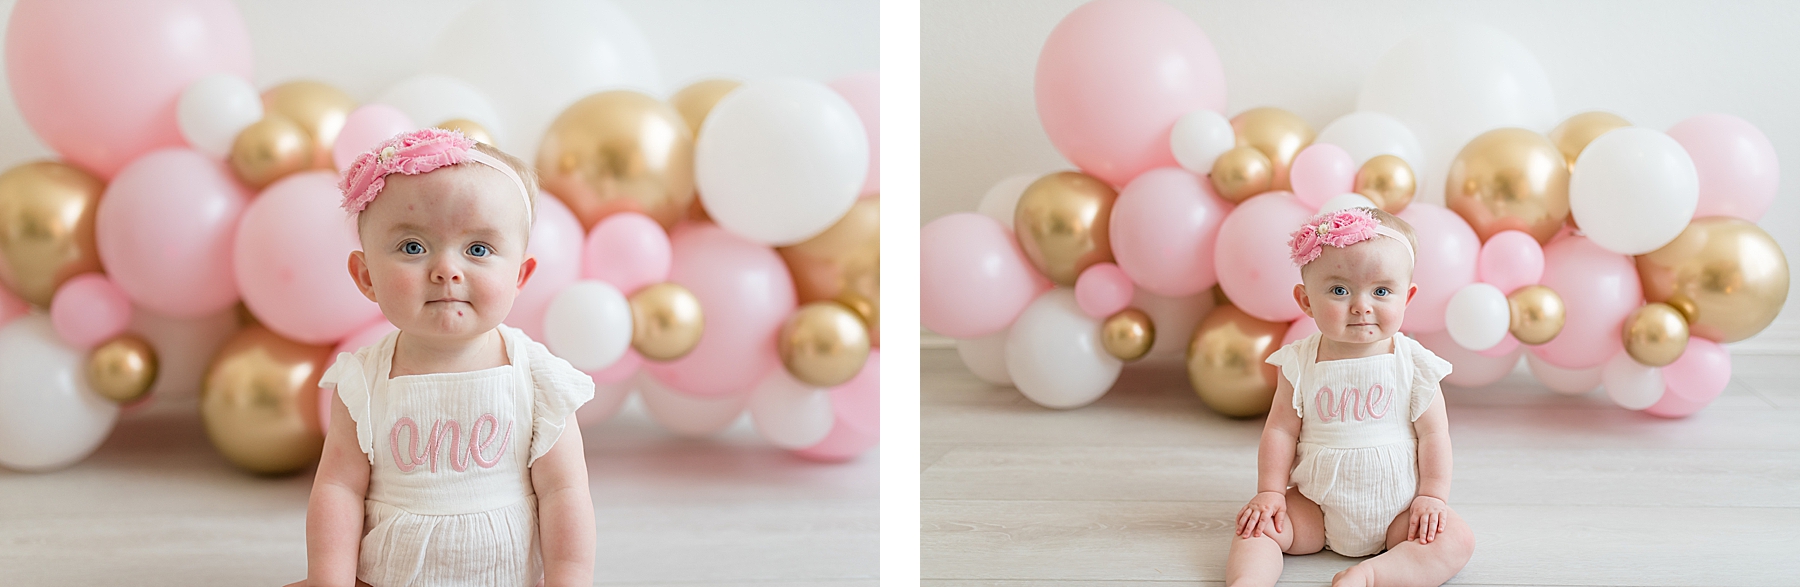 Little girl sitting in front of balloons. Photographed by Dallas newborn photographer Lindsey Dutton Photography